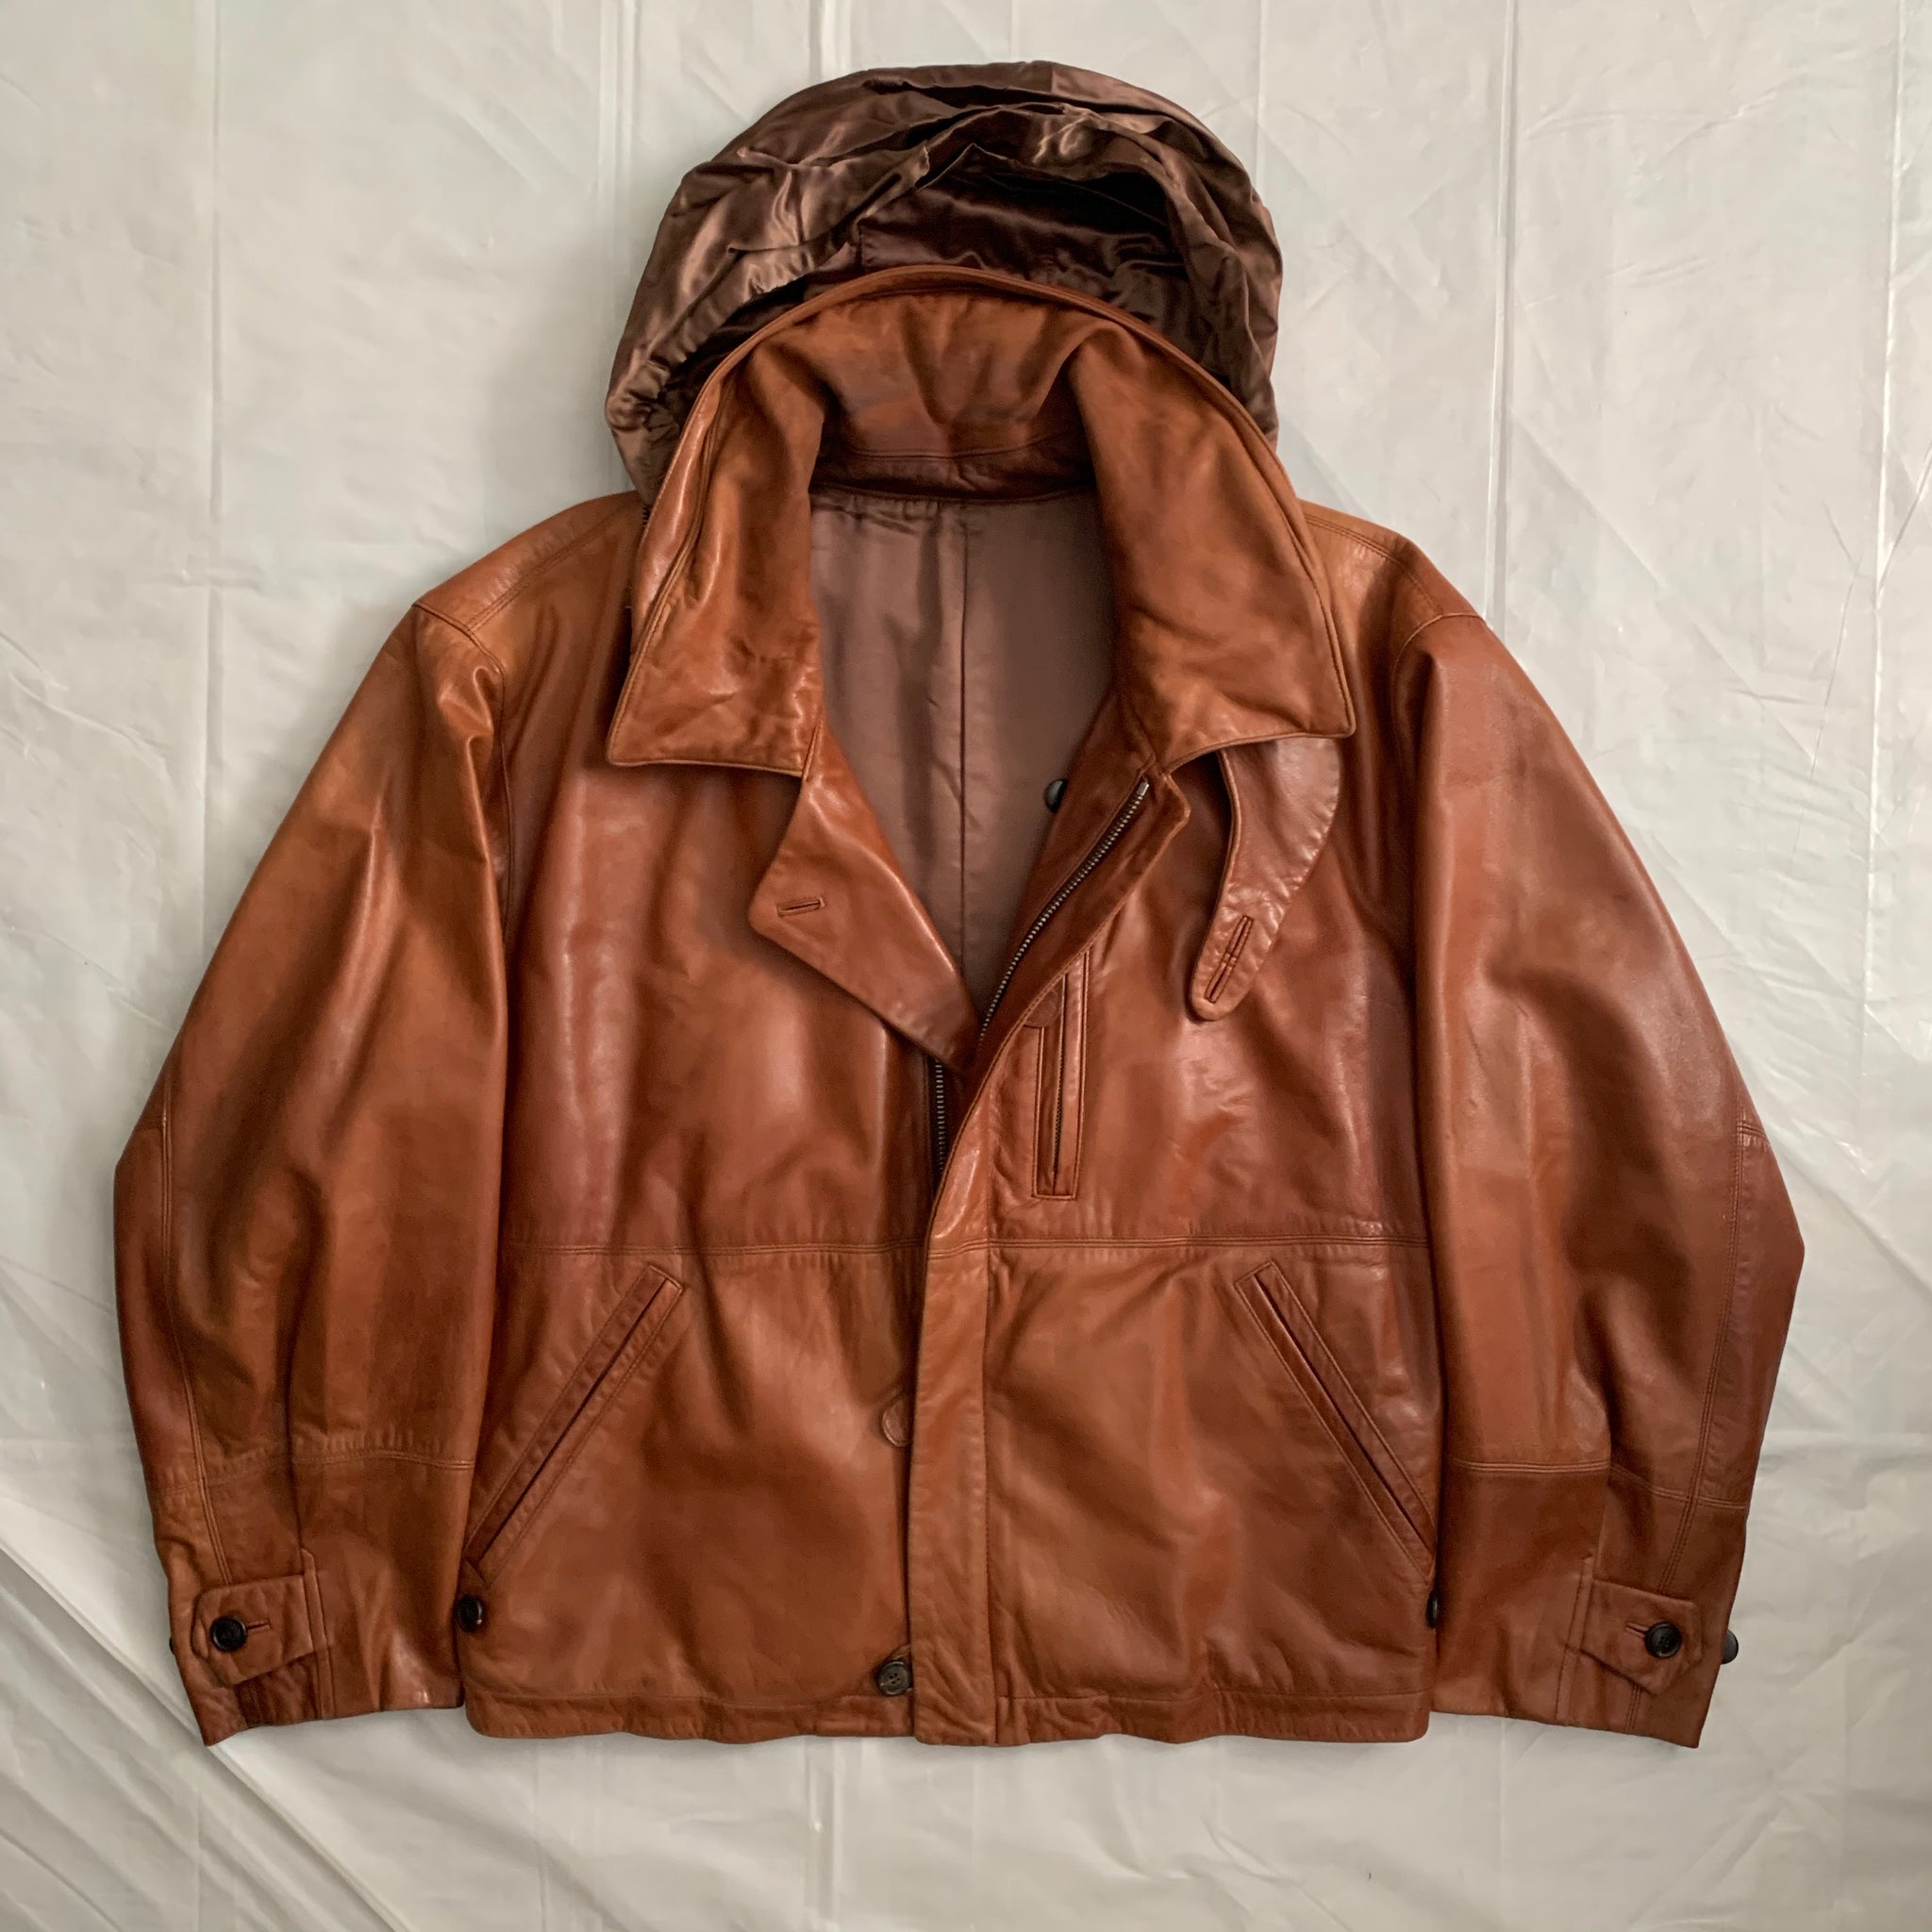 aw1992 Issey Miyake Leather Pillow Neck Flight Jacket with Packable Hood -  Size XL